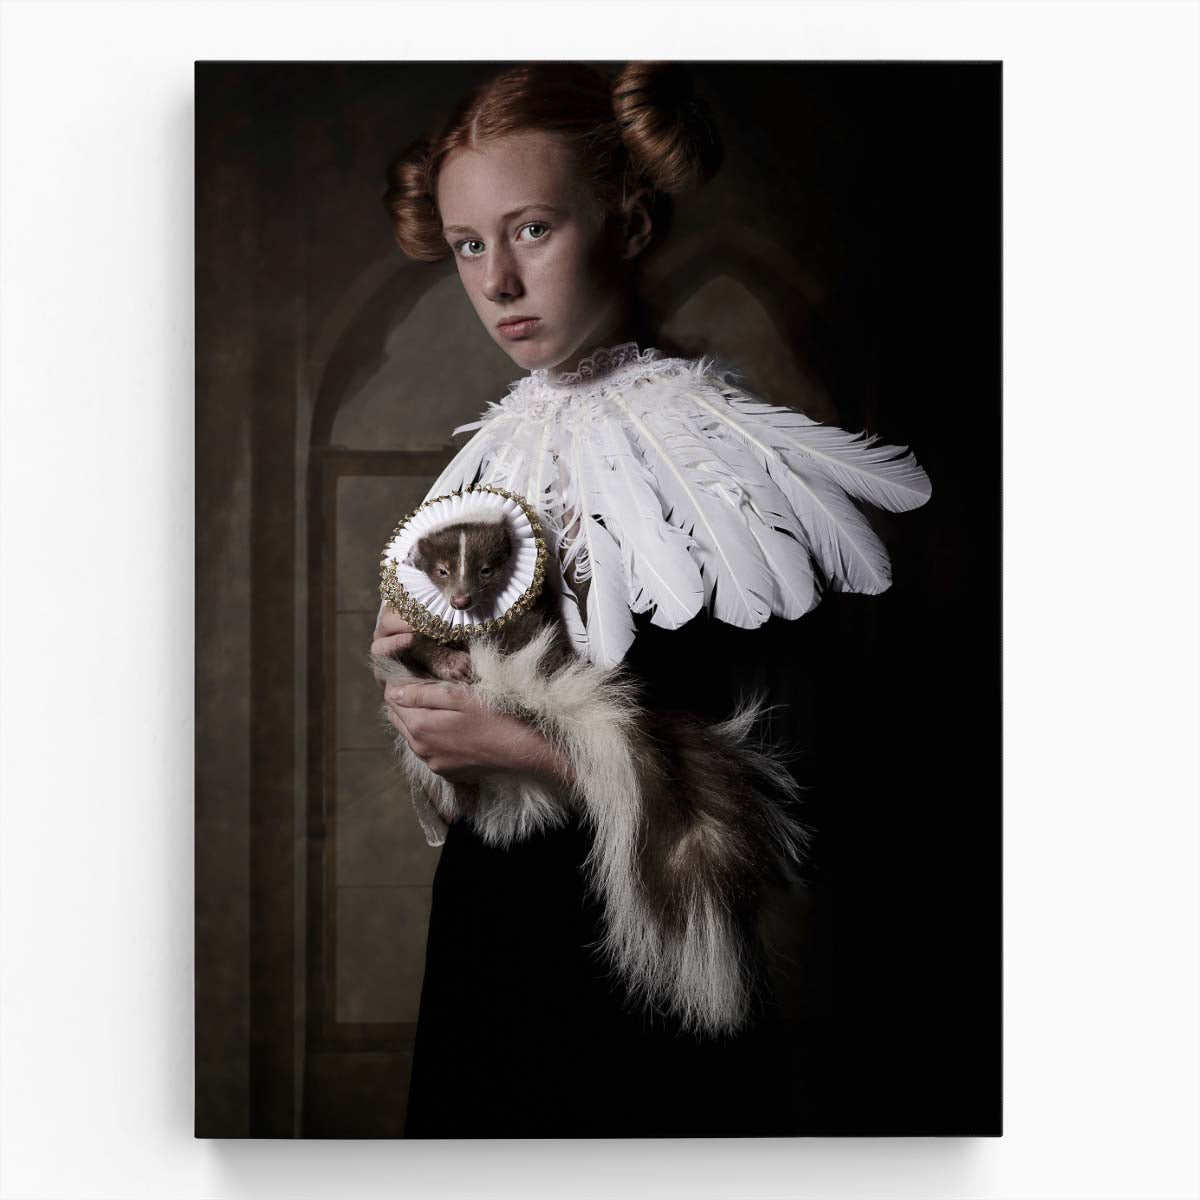 Vintage Dutch Girl Portrait with Skunk, Feathered Collar Photography Art by Luxuriance Designs, made in USA